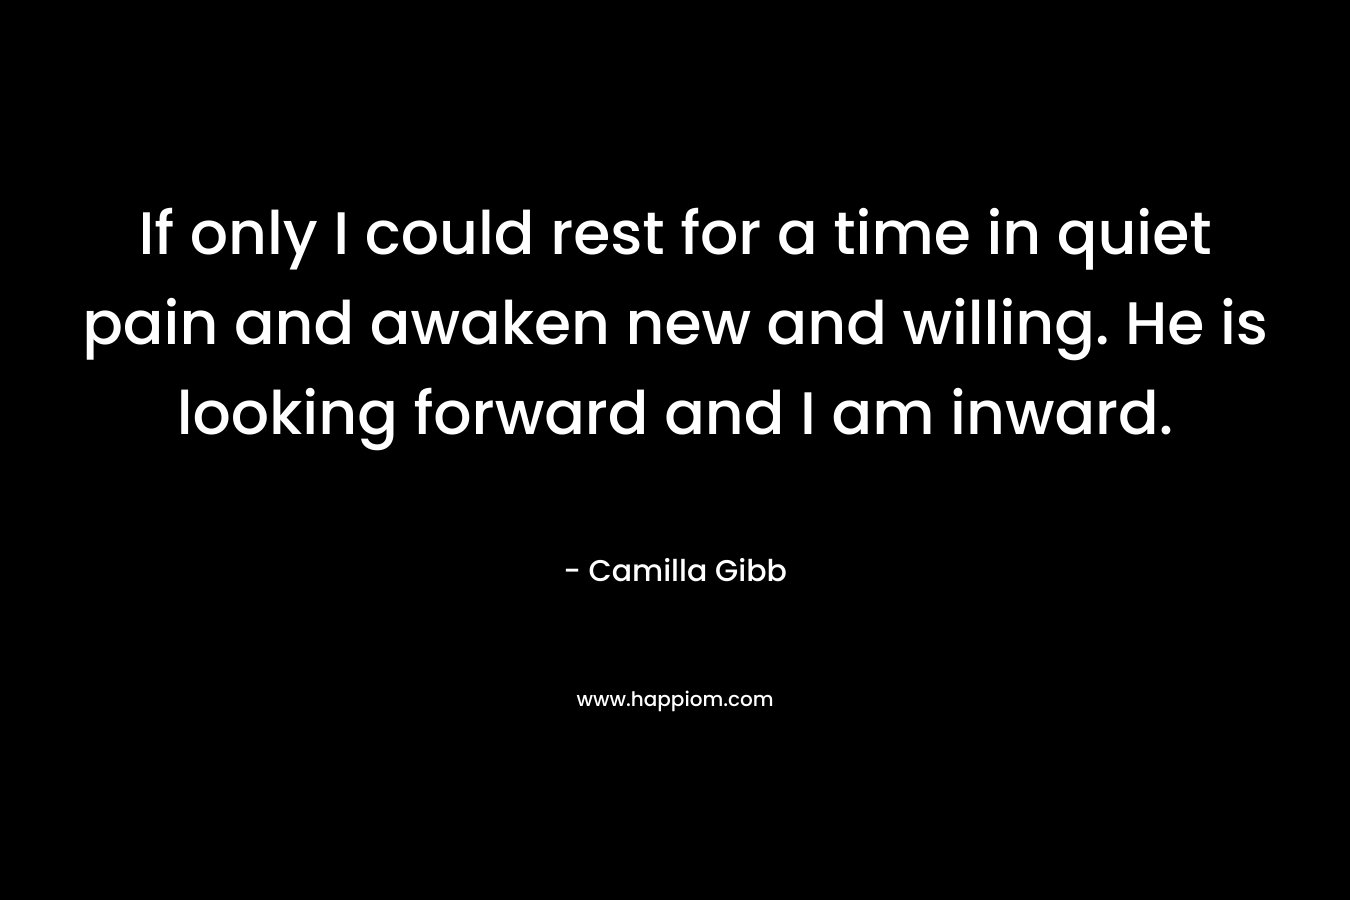 If only I could rest for a time in quiet pain and awaken new and willing. He is looking forward and I am inward. – Camilla Gibb